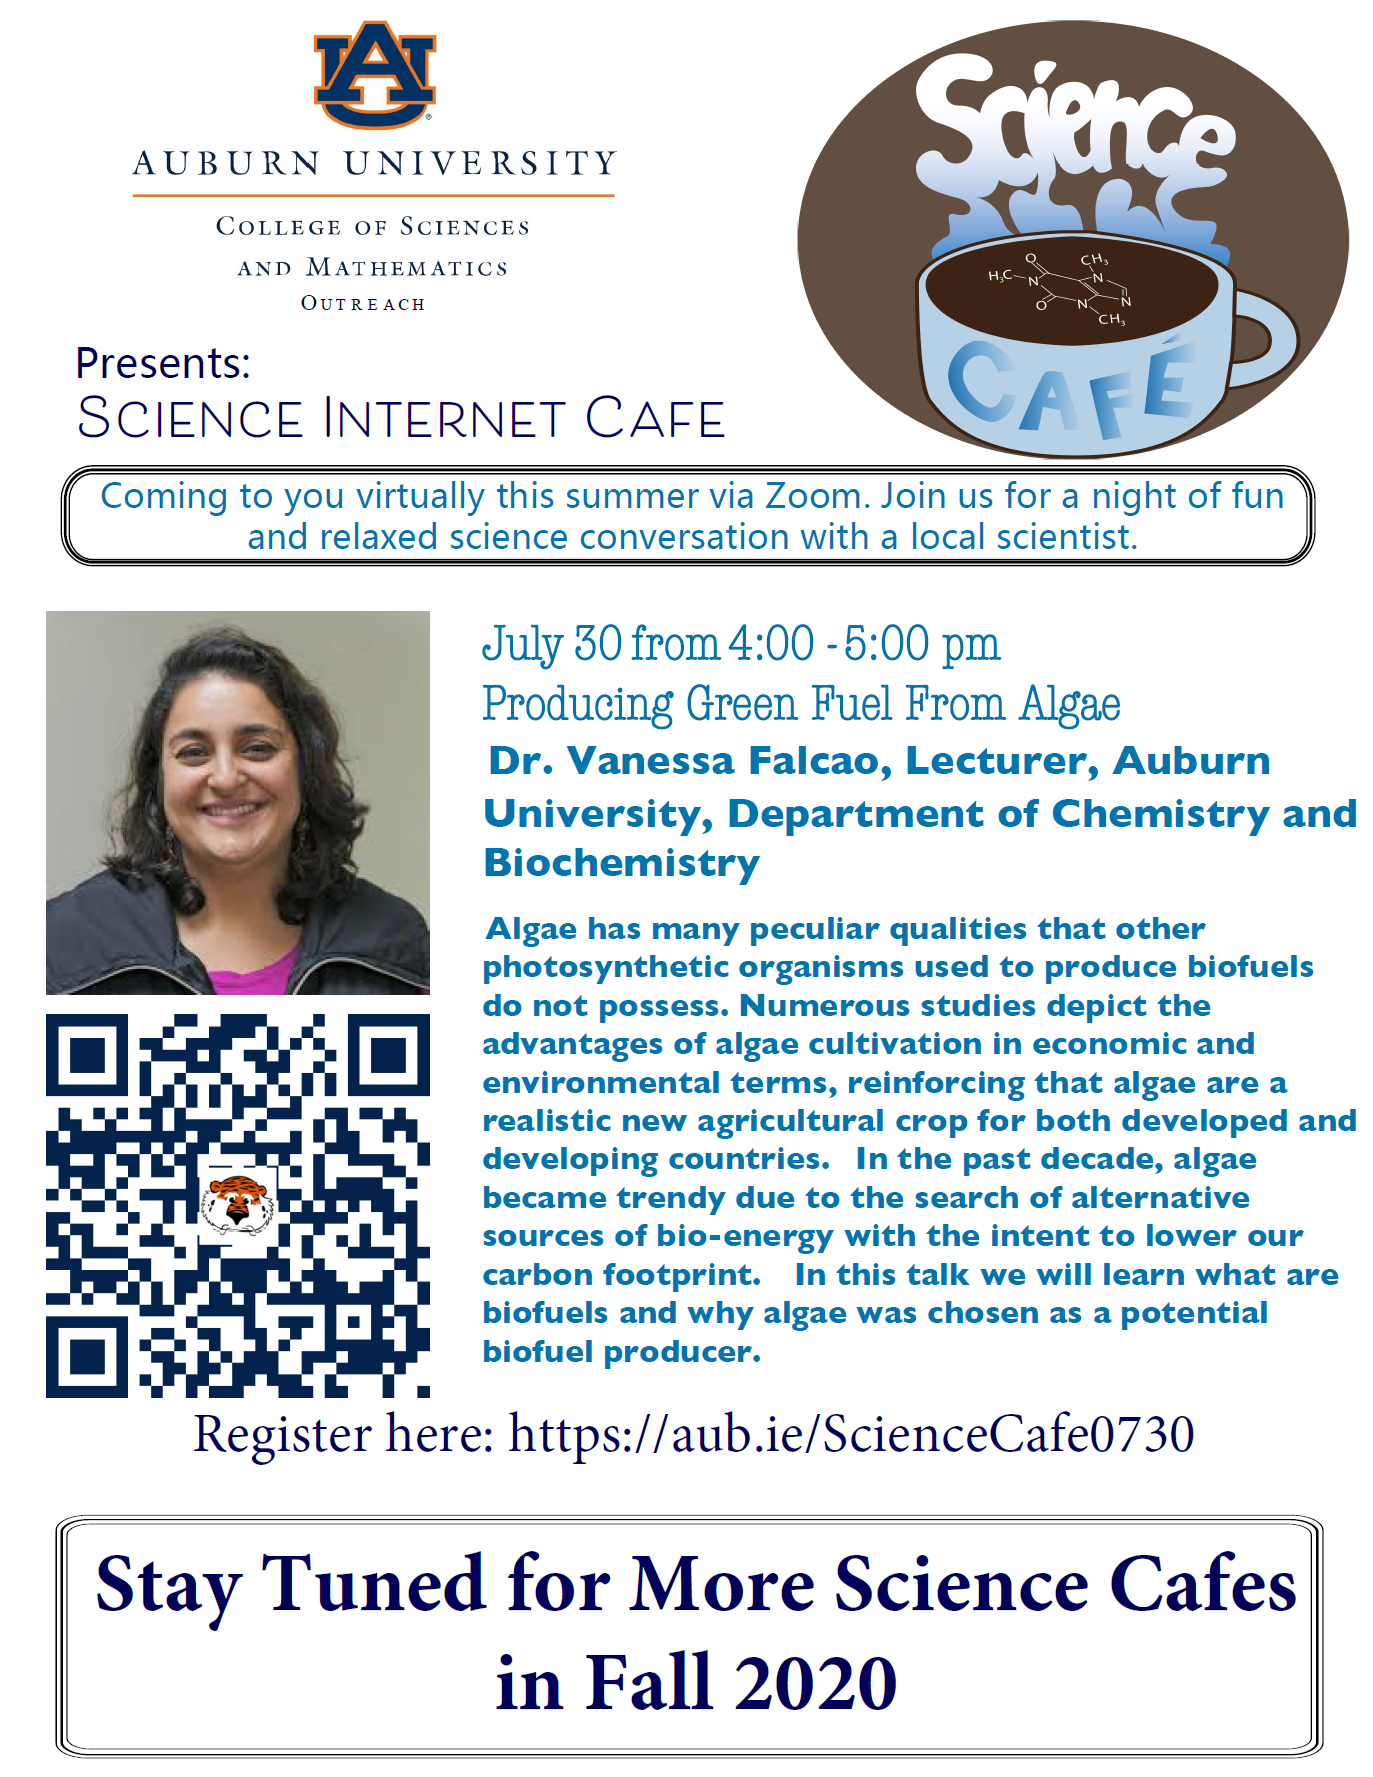 Join Vanessa Falcao at this Week's Science Cafe